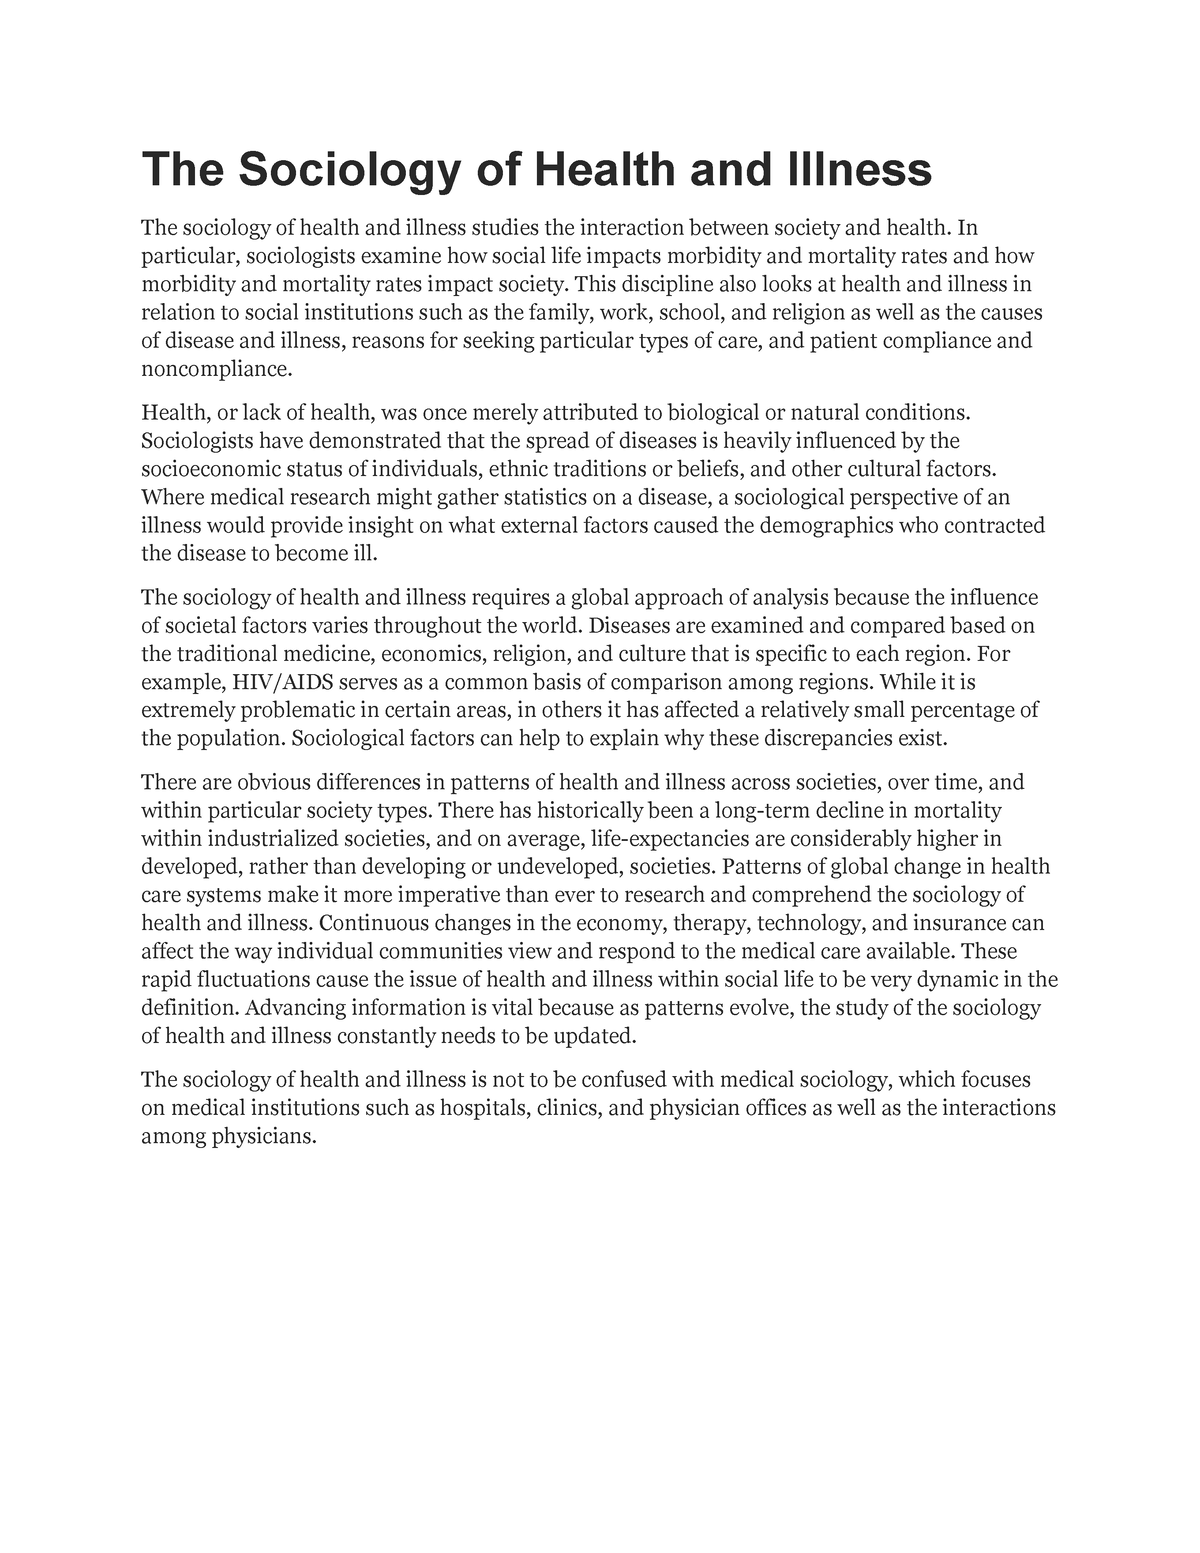 health sociology research topics